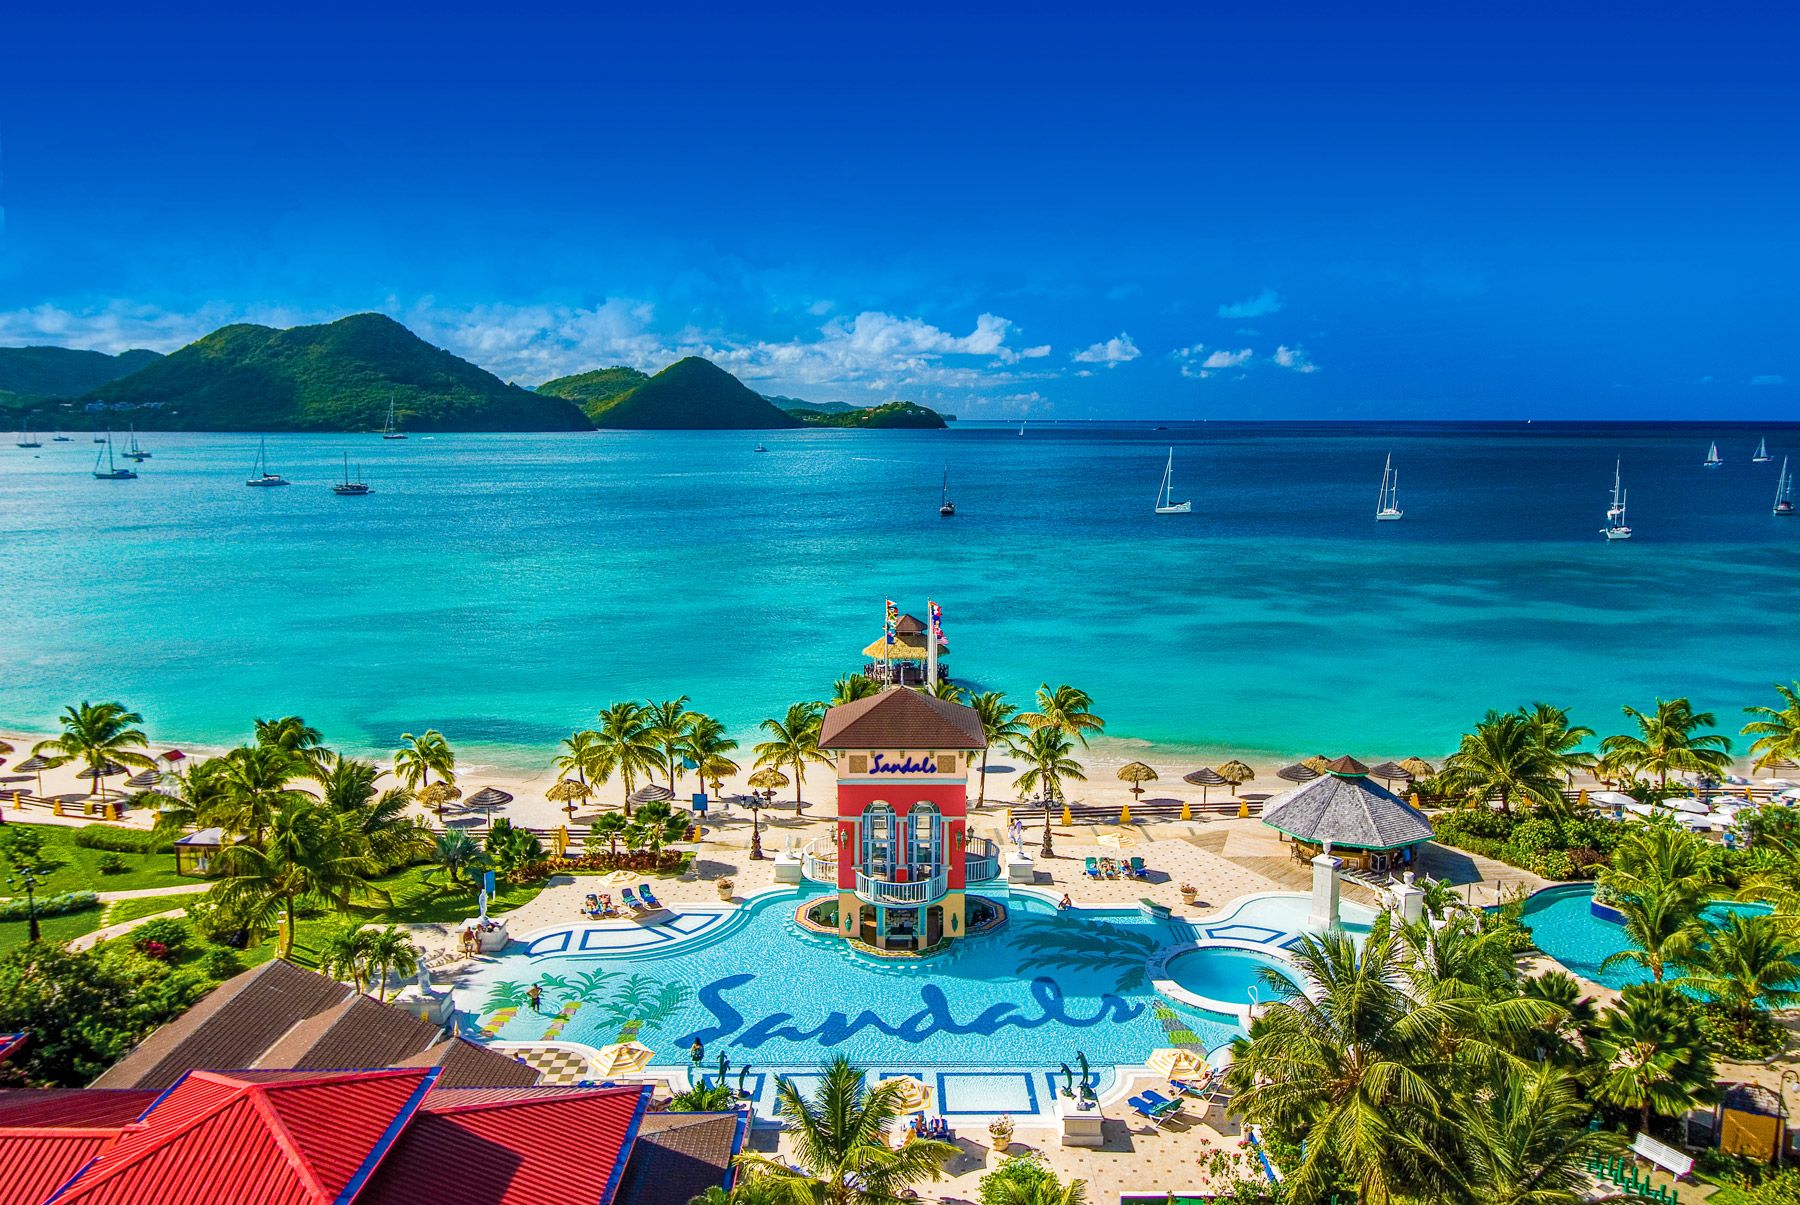 Three things guests love about... Sandals Grande St. Lucian. A full review.